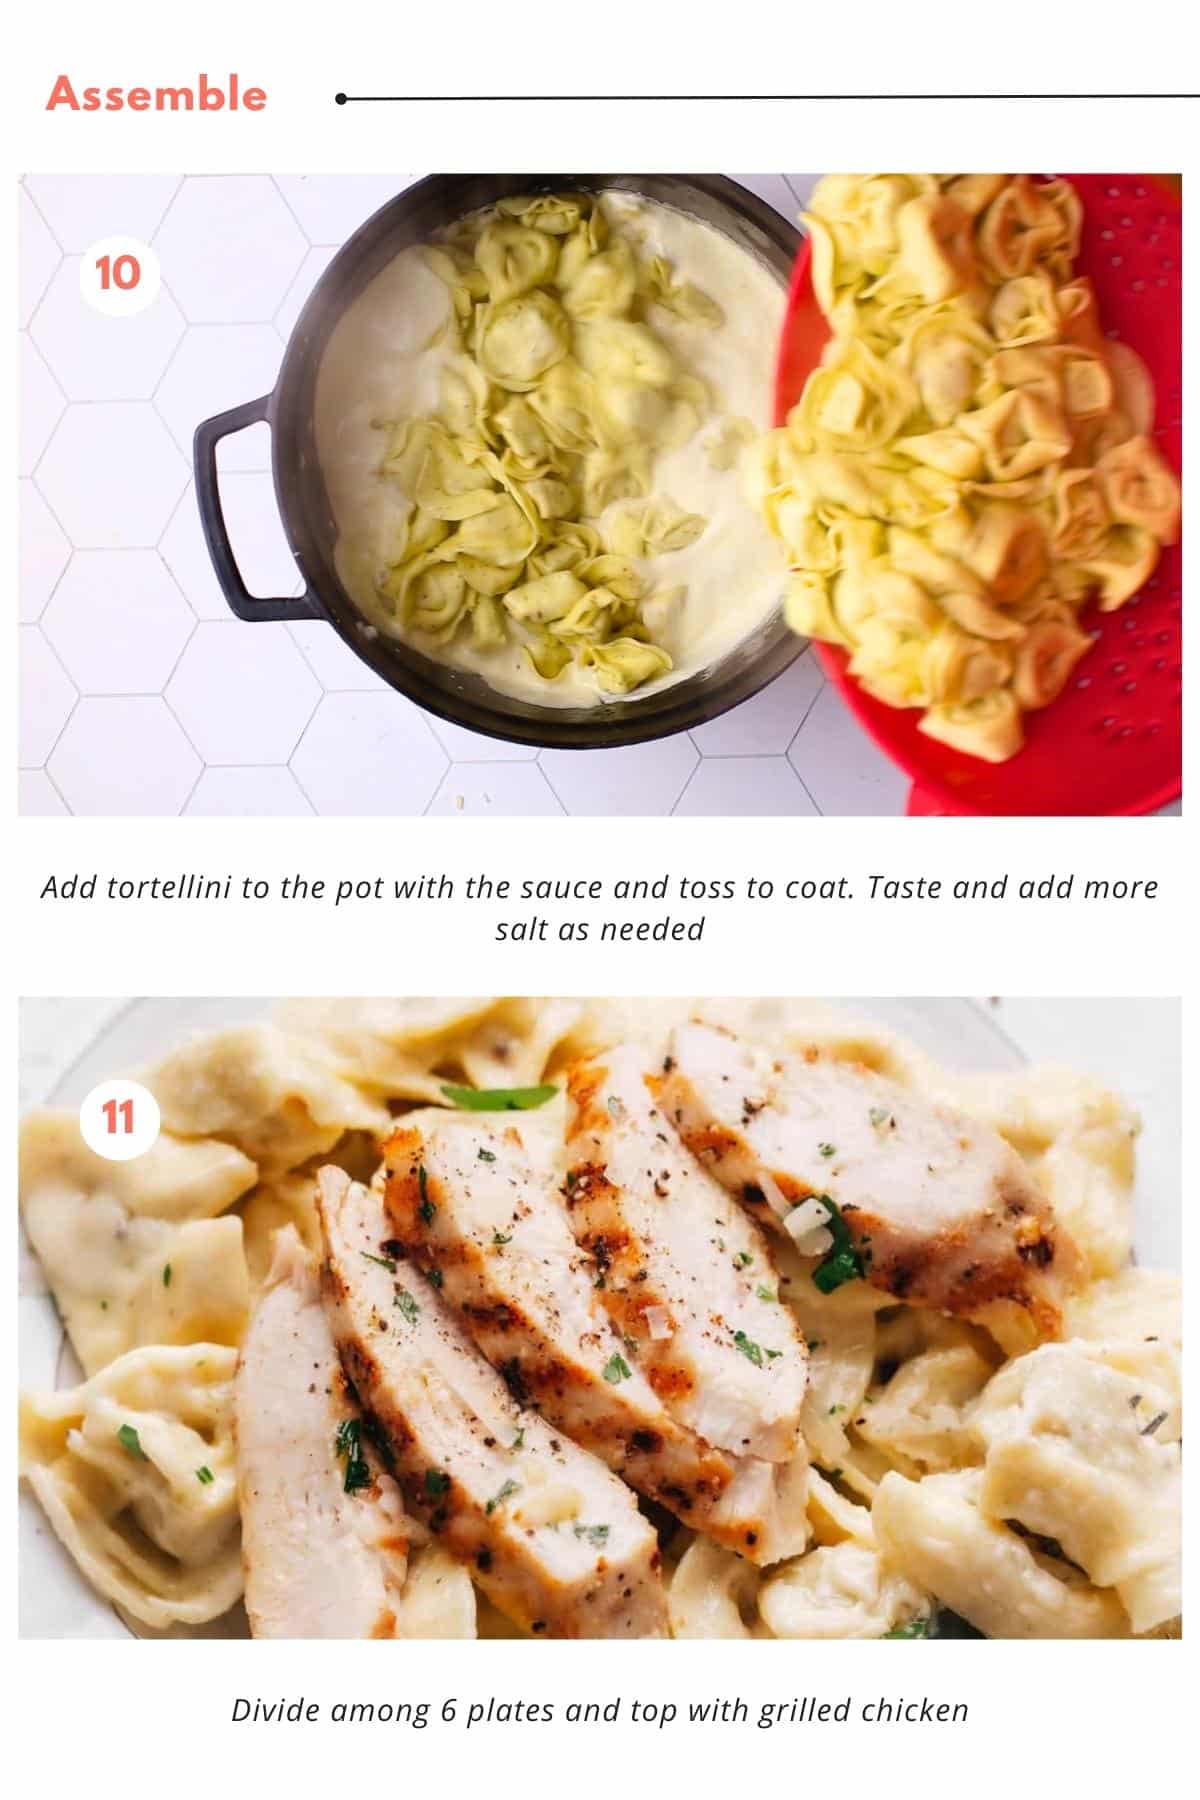 Tortellini is added to the pot with the sauce and tossed to coat. Finally, Asiago tortellini Alfredo with grilled chicken served on a white plate on a wooden table. The dish is garnished with minced chives and parsley.